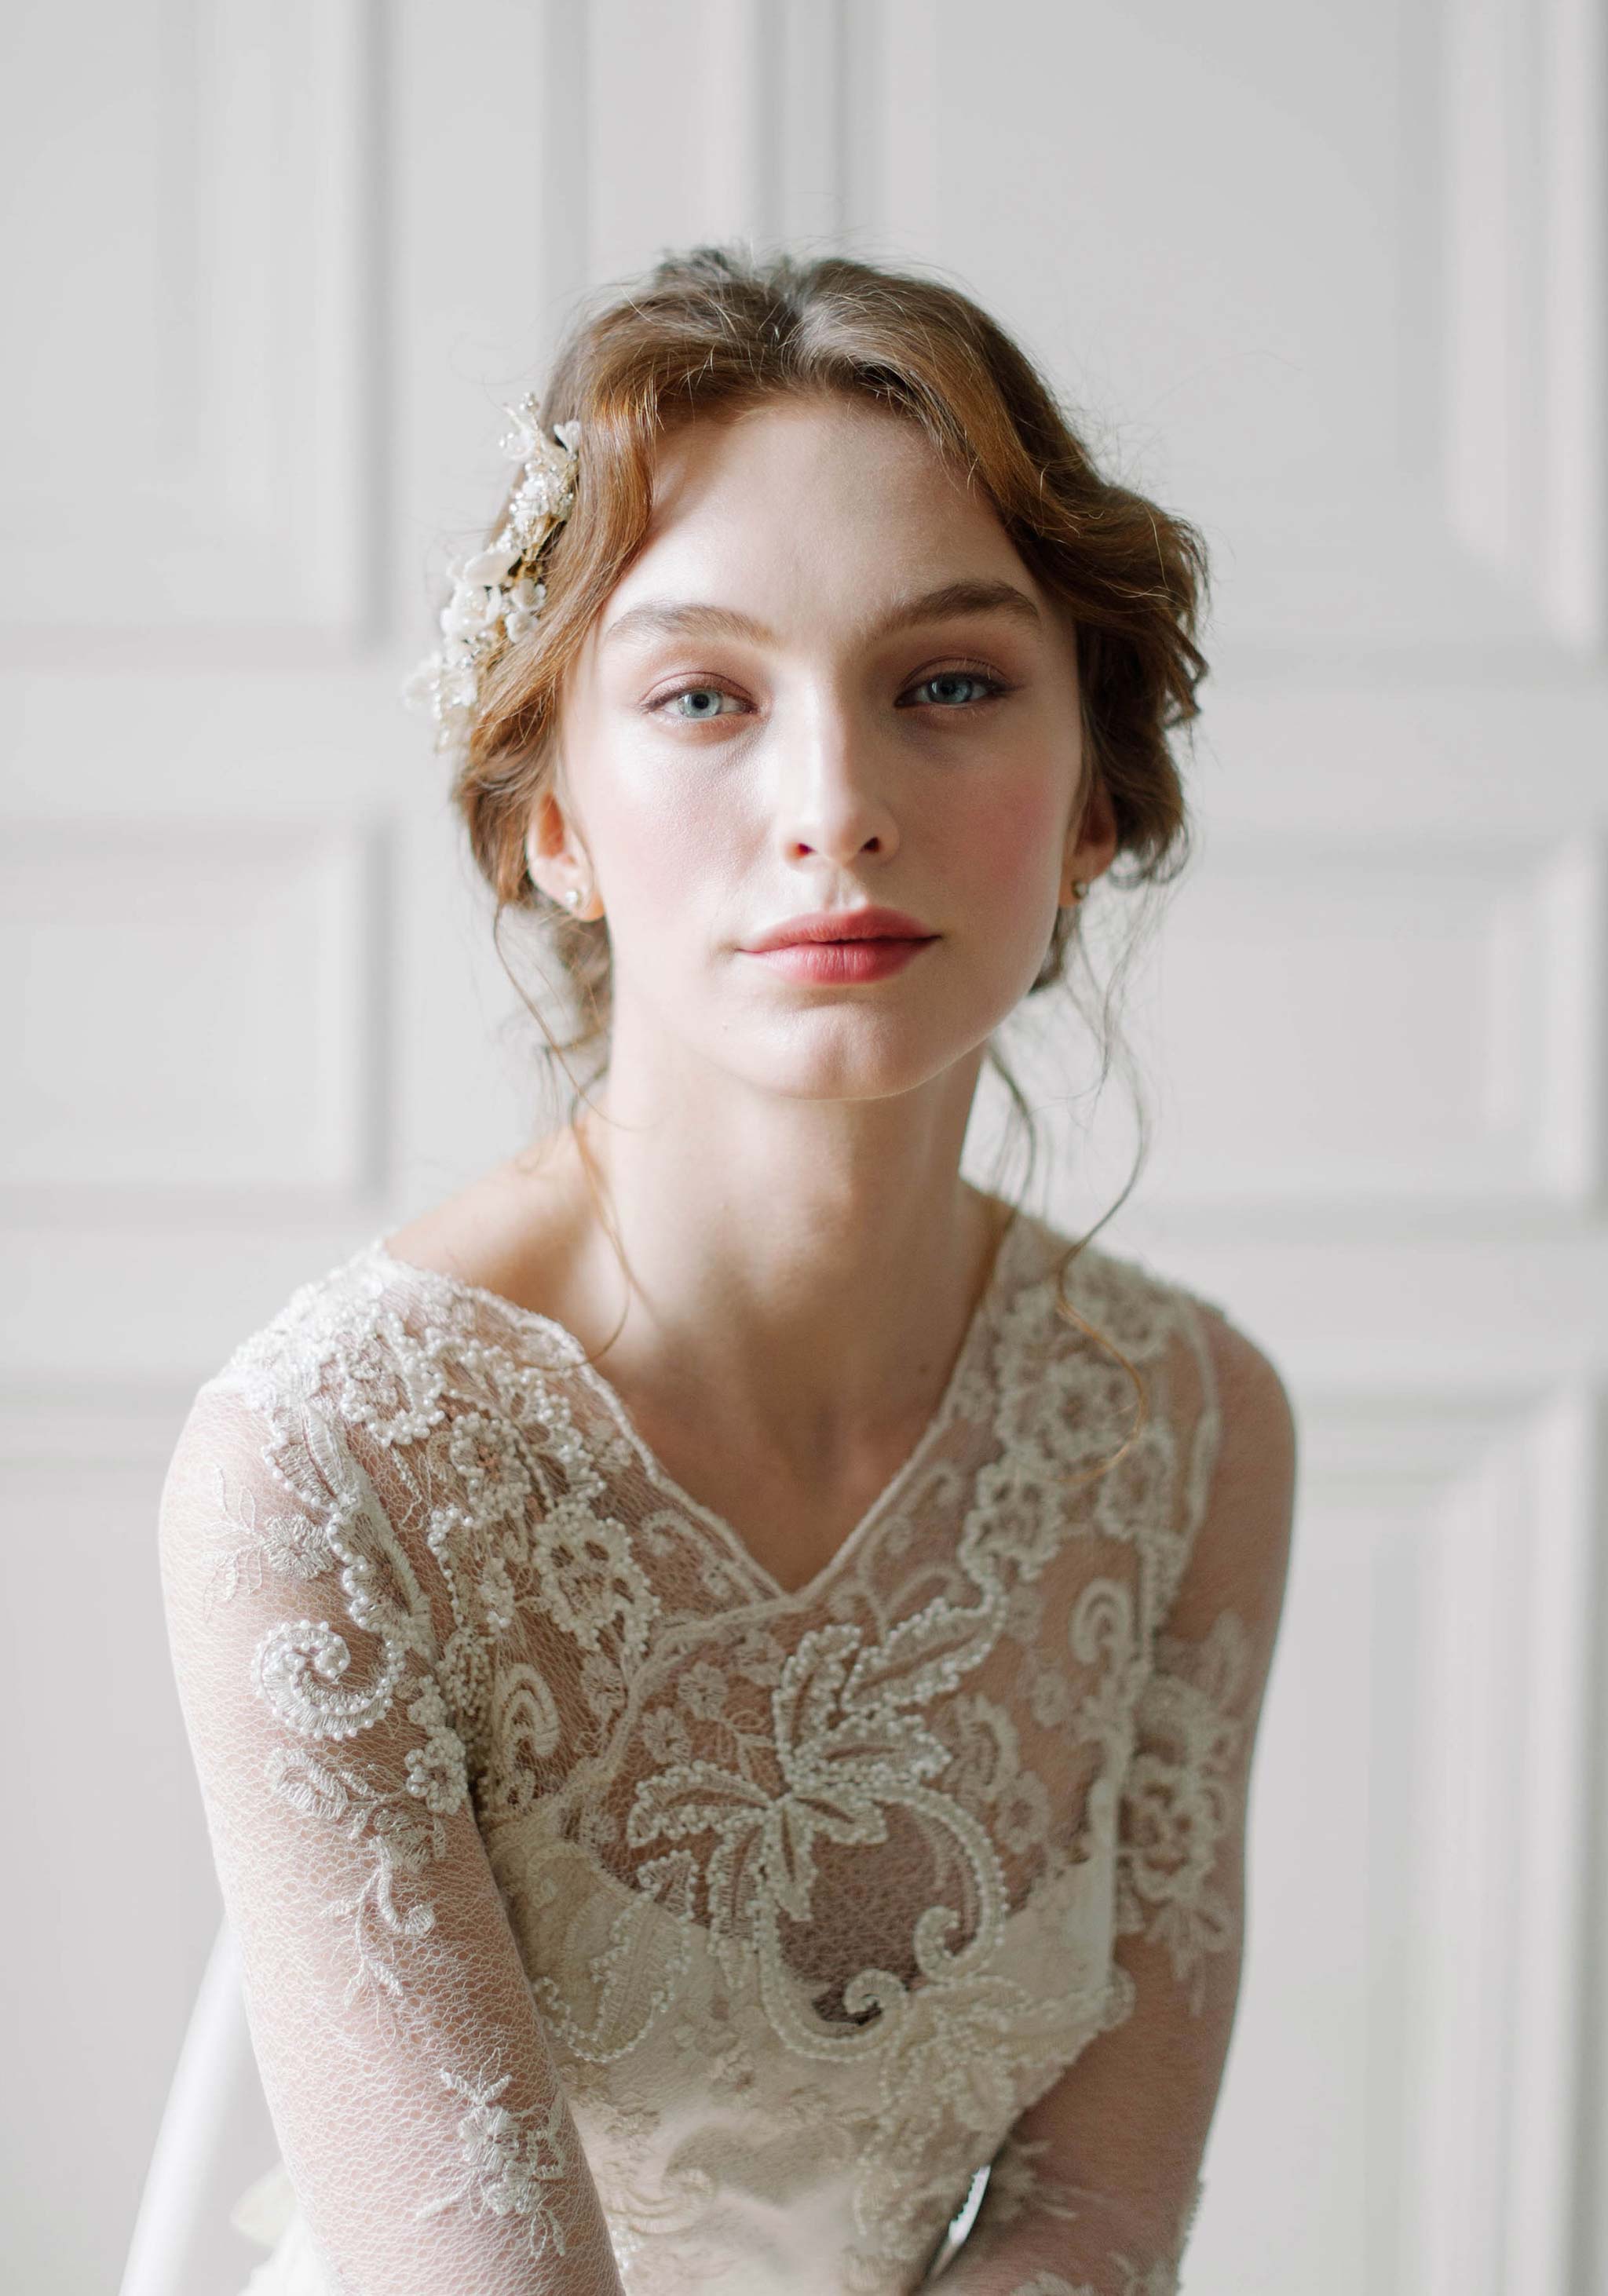 Wedding Dresses | Ethical Bridal Gowns – Grace Loves Lace US